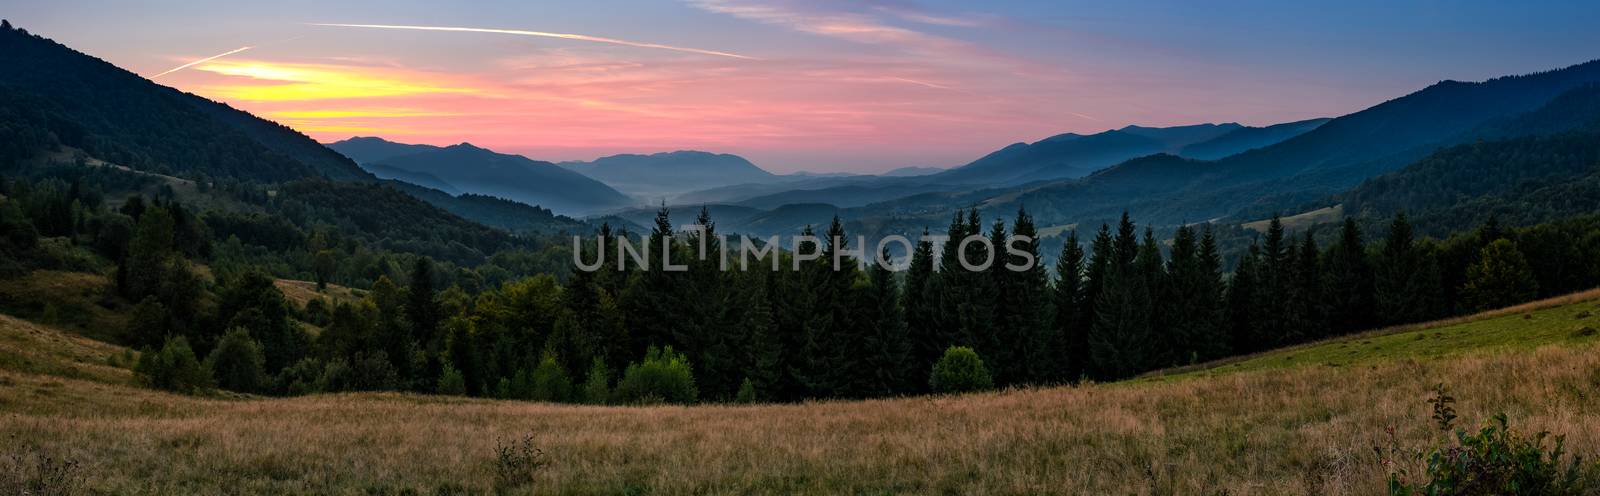 gorgeous panorama of landscape with spruce forest in mountains. lovely scenery with reddish sky above the valley at dusk in early autumn